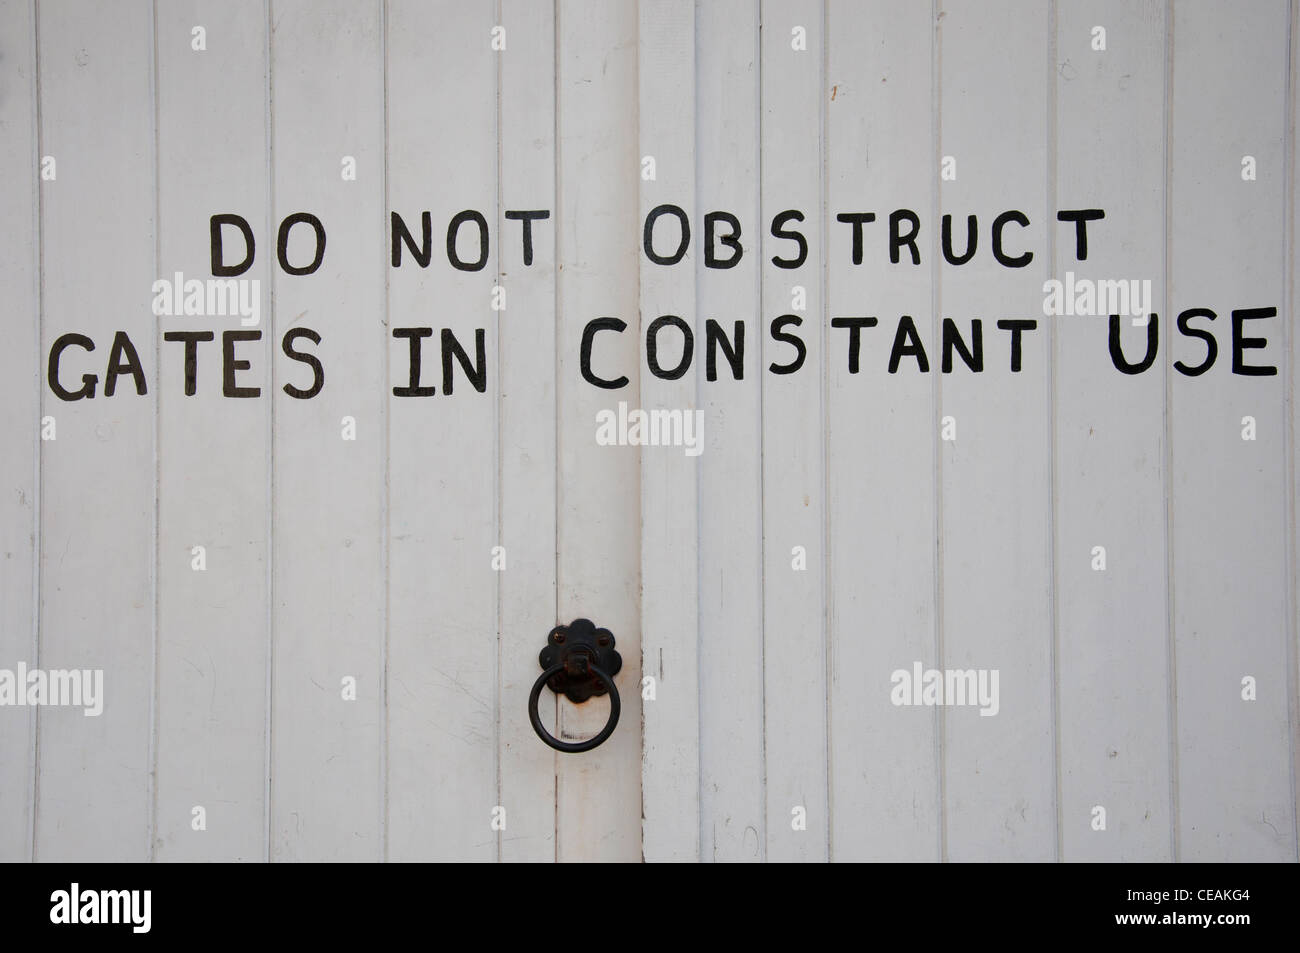 Wooden garage doors with do not obstruct sign. Stock Photo